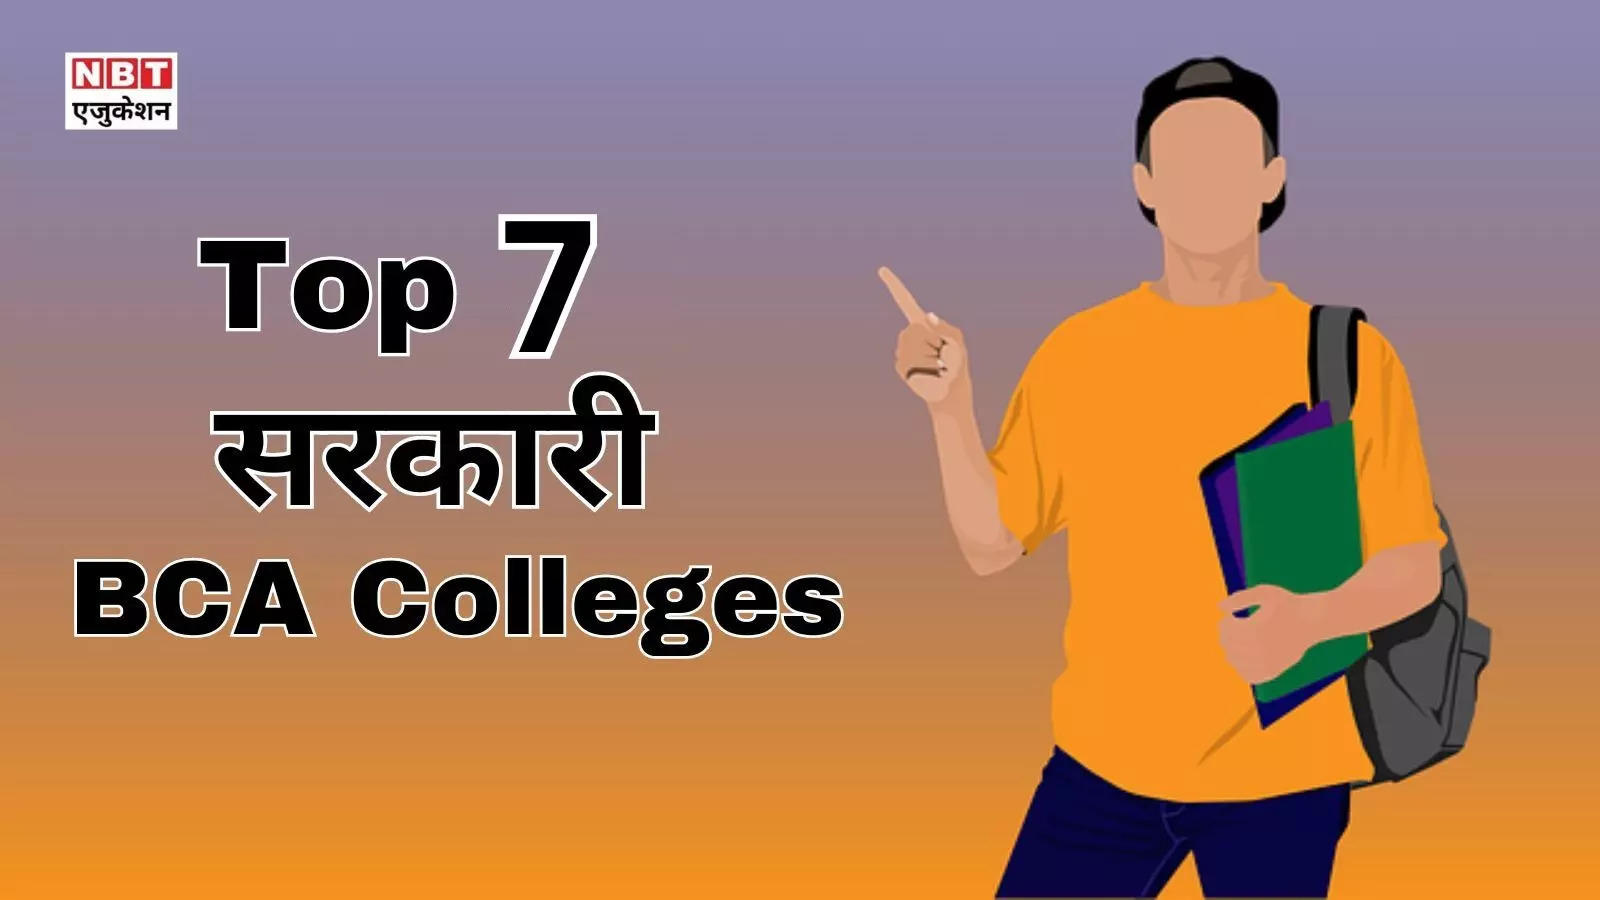 Best College for BCA: These are the top 7 government BCA colleges in India, placements are available on packages worth lakhs!